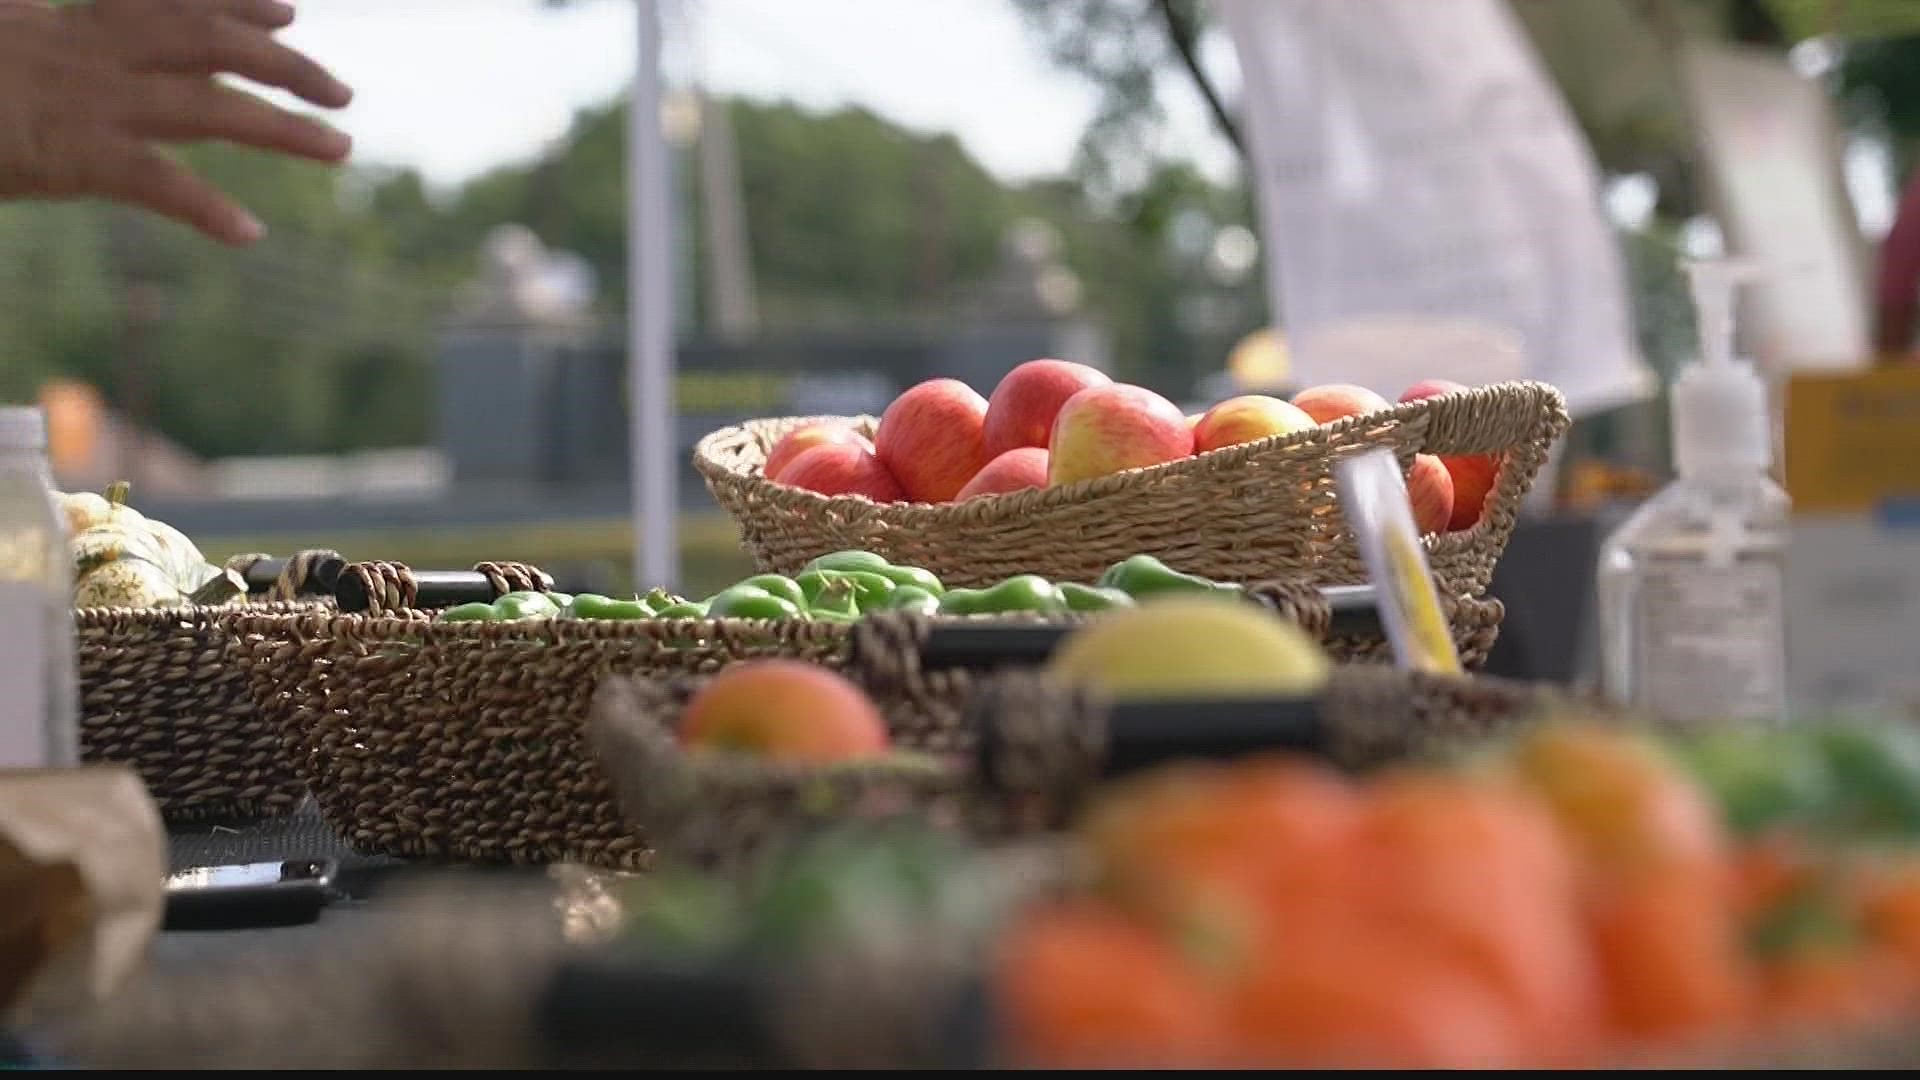 Two Georgia organizations are coming together to tackle food insecurity across the state.